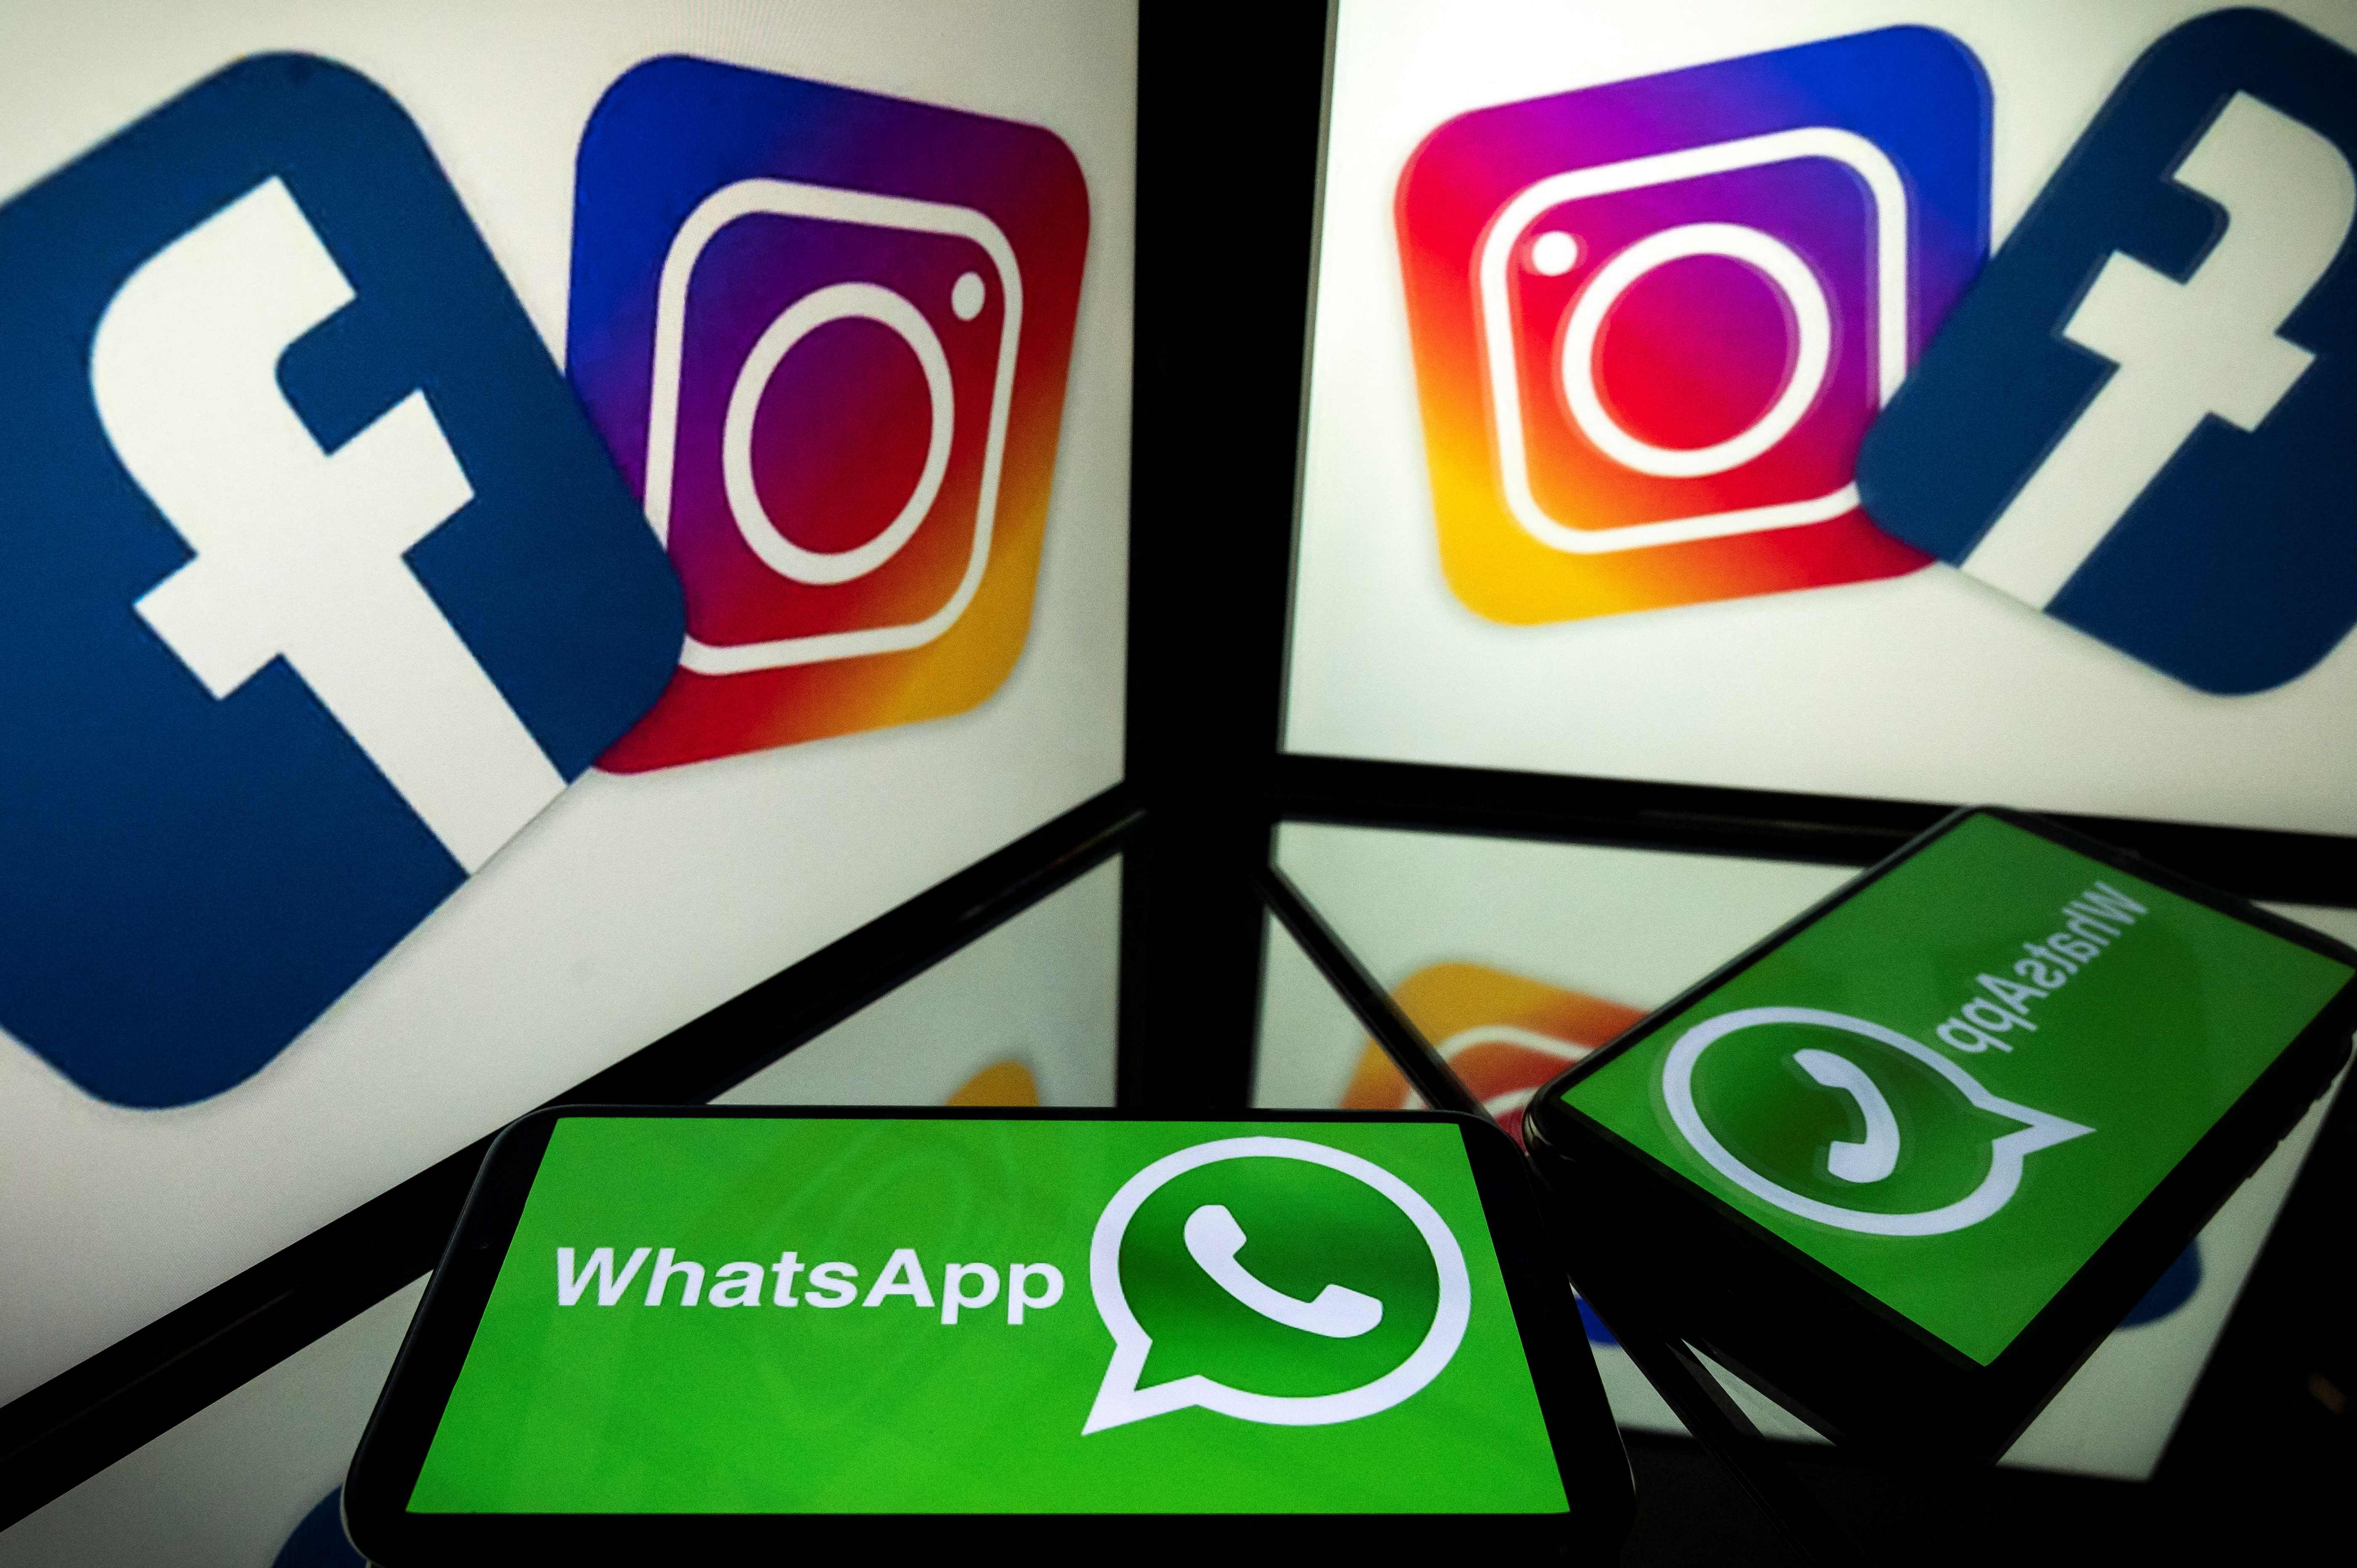 Facebook, WhatsApp and Instagram were offline for hours on Monday